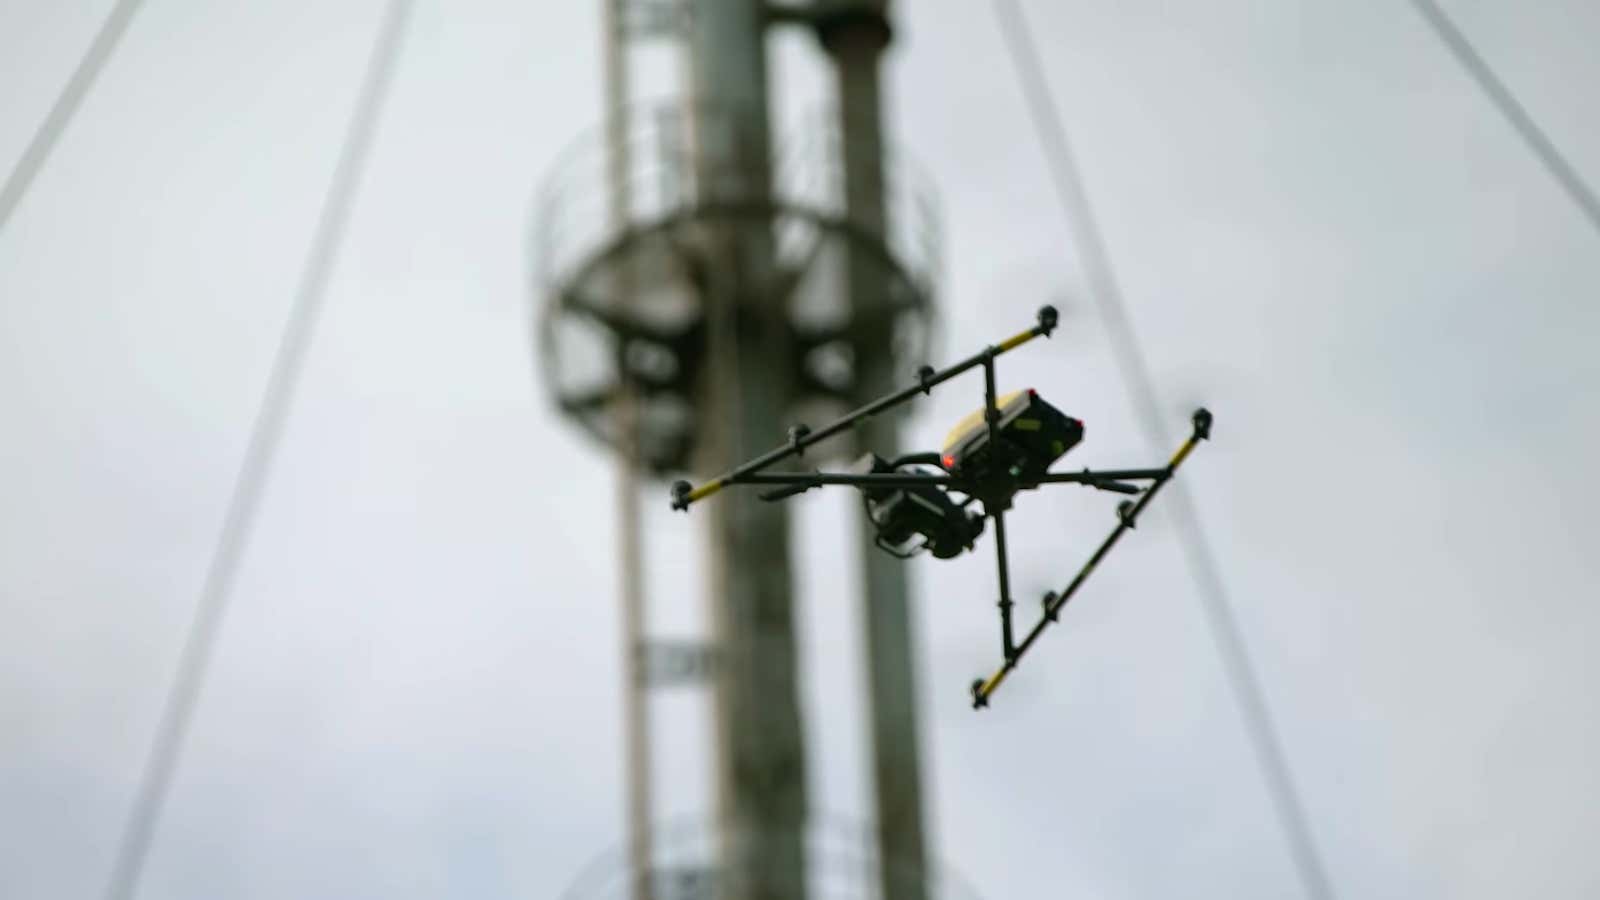 Flying cameras have found a sense of belonging at oil and gas facilities